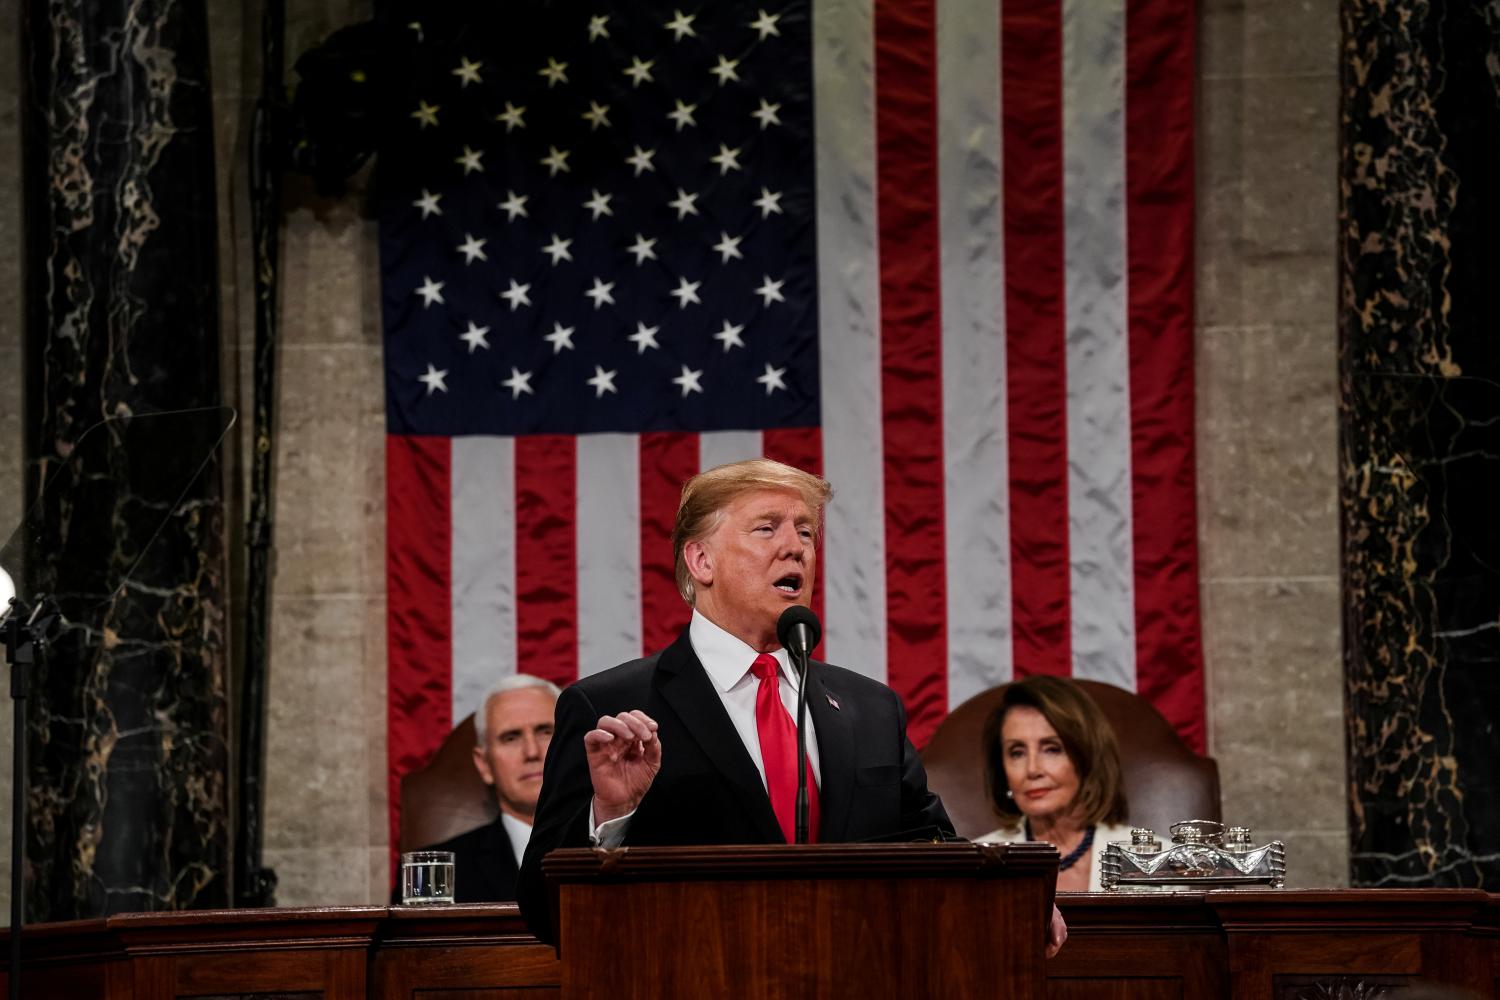 FEBRUARY 5, 2019 - WASHINGTON, DC: President Donald Trump delivered the State of the Union address, with Vice President Mike Pence and Speaker of the House Nancy Pelosi, at the Capitol in Washington, DC on February 5, 2019. Doug Mills/Pool via REUTERS - RC111FD41E00